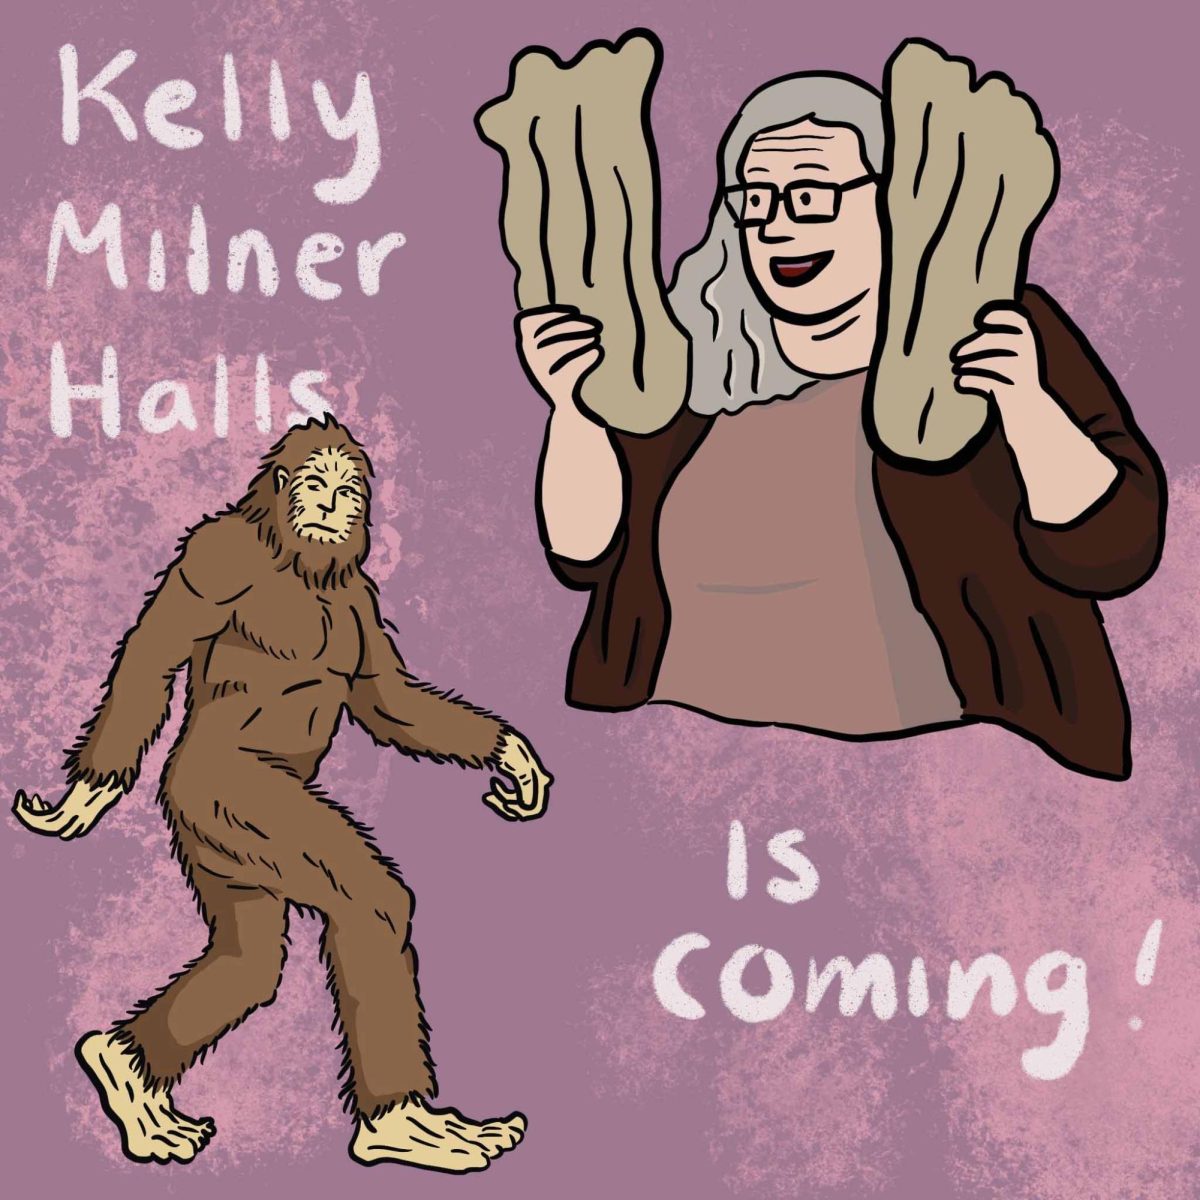 Local childrens author Kelly Milner Halls is presenting on cryptozoology and Bigfoot.